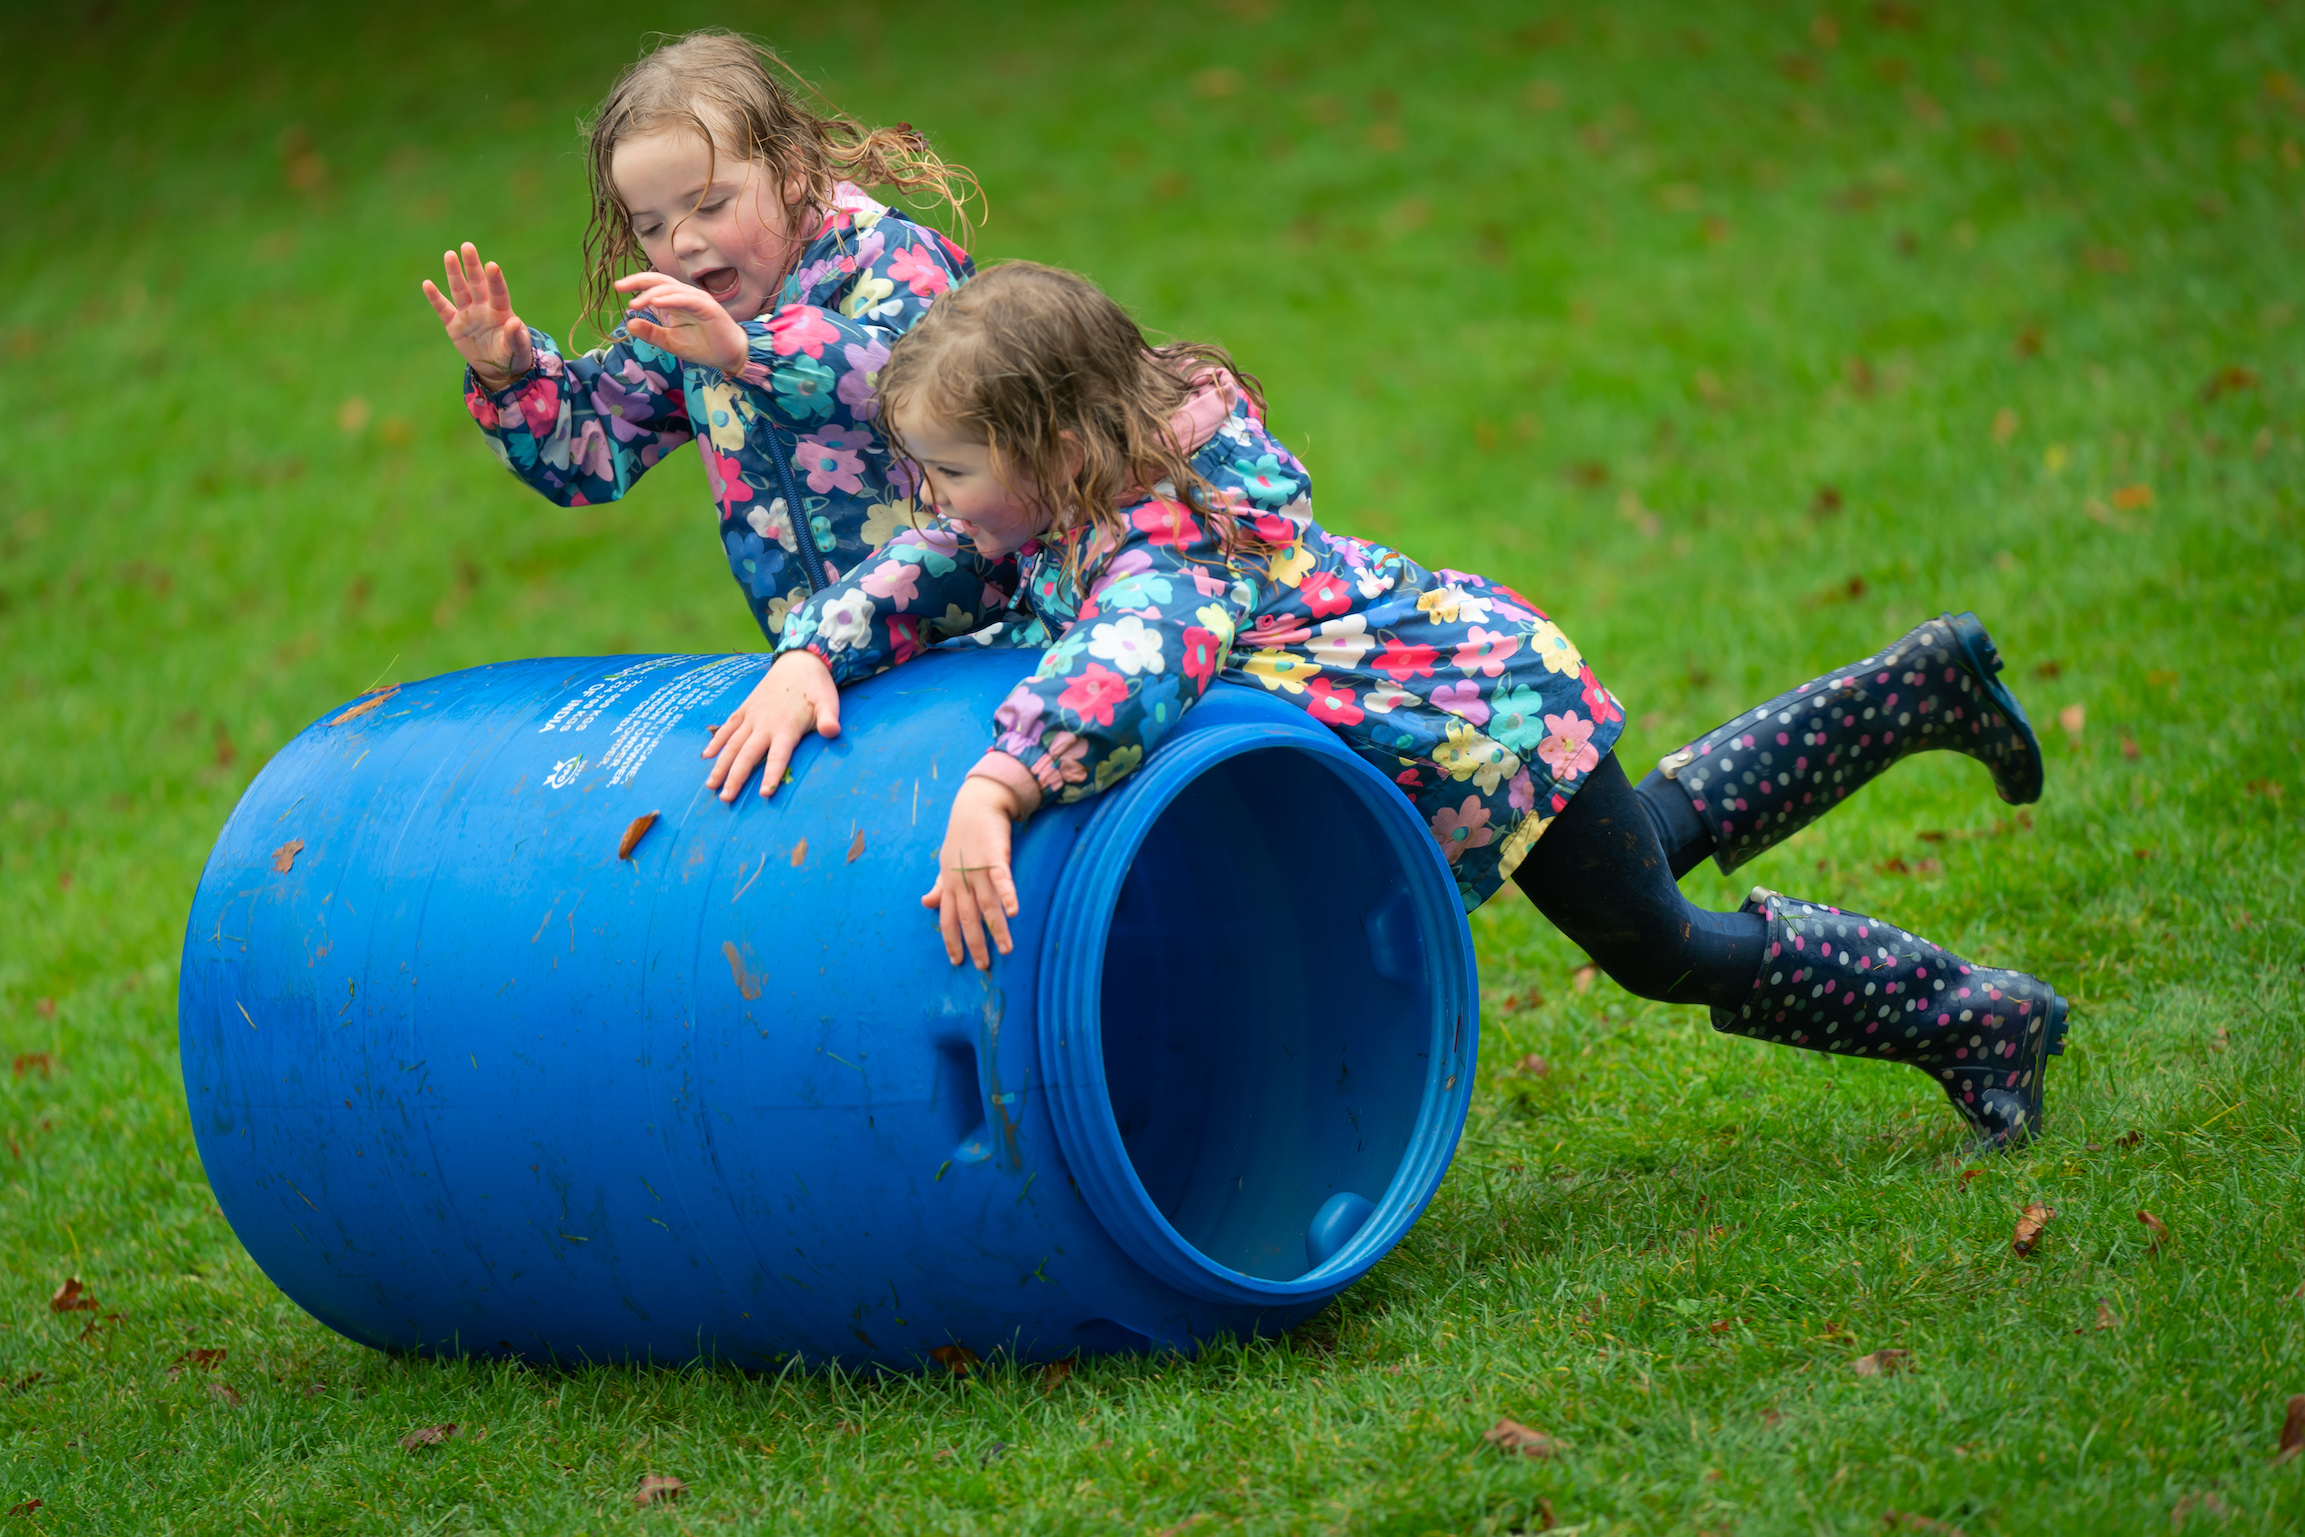 children playing with empty barrel